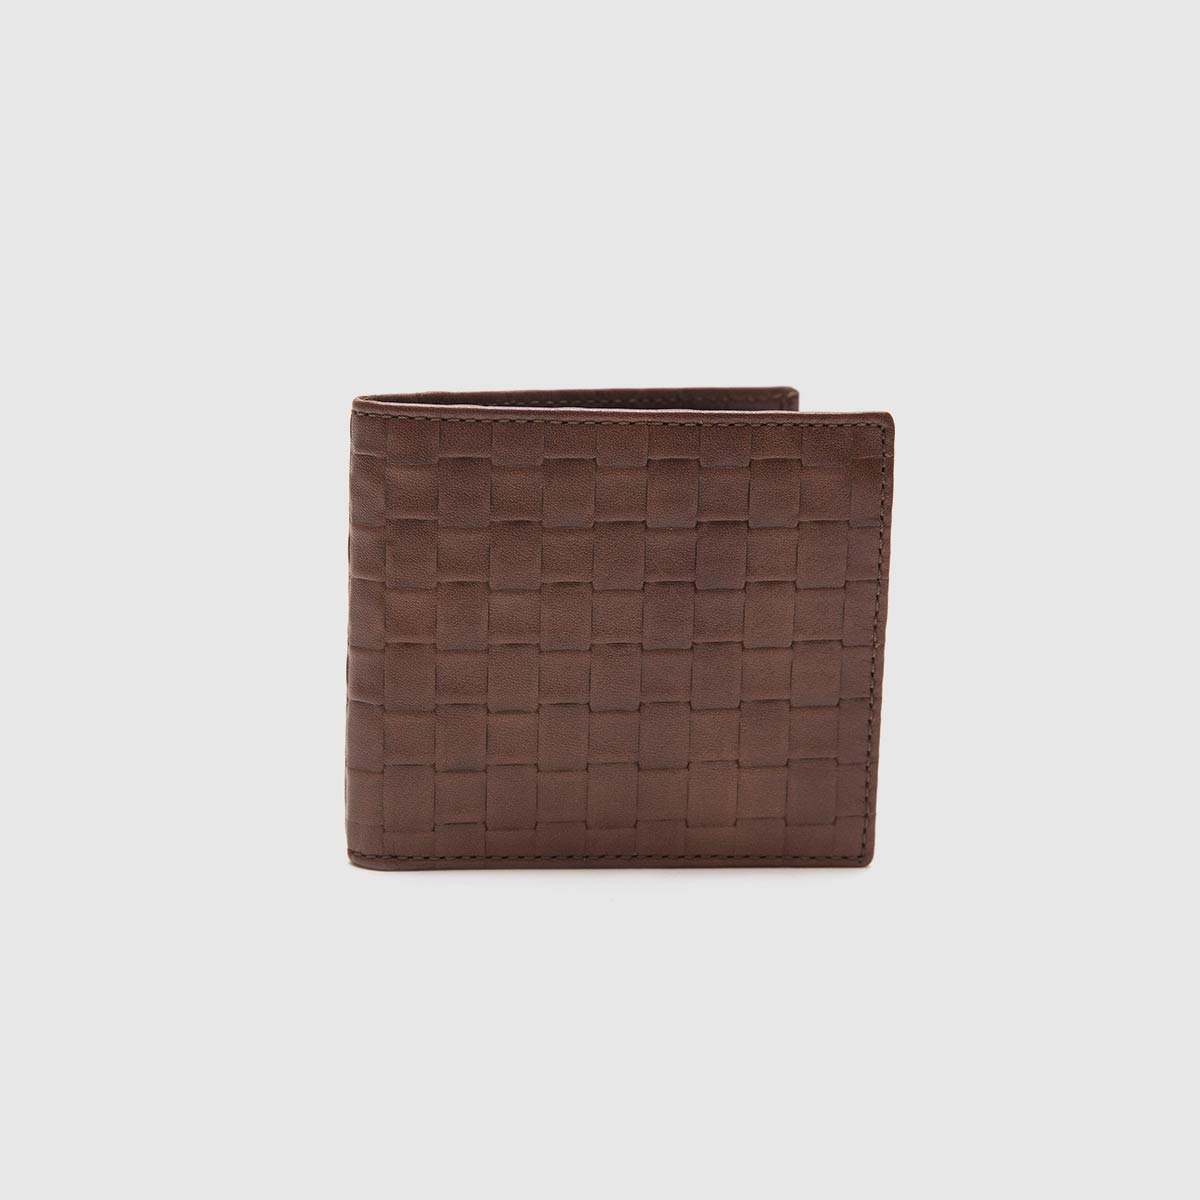 Leather wallet with woven print Davide Albertario on sale 2022 2